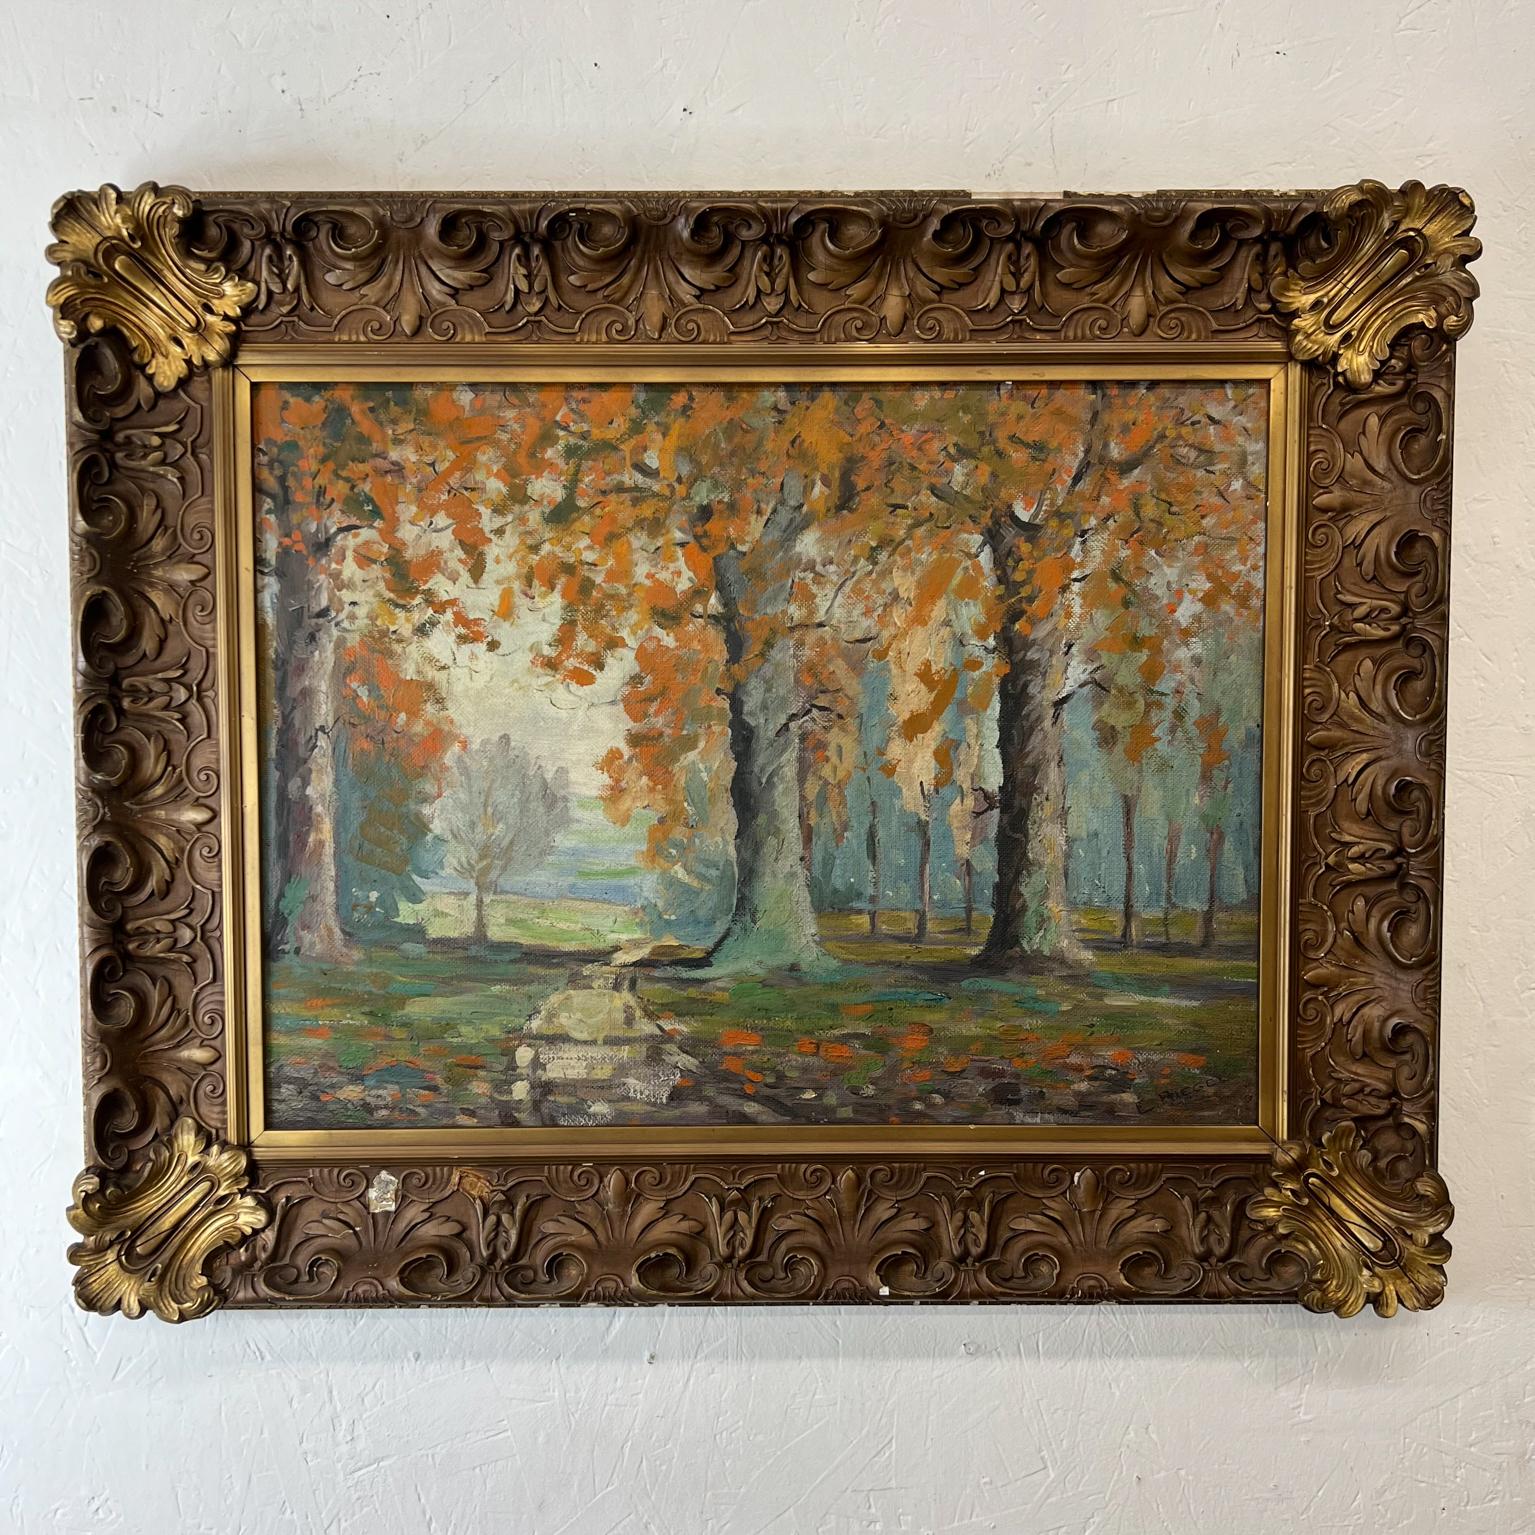 Lovely vintage Art oil on canvas impressionism signed Artwork Framed
Measures: 34.63 width x 28.25 tall x 2.5 depth Art 25 x 19 tall
Oil on Masonite canvas landscape fall trees
Preowned Vintage condition unrestored. Chipping, wear and